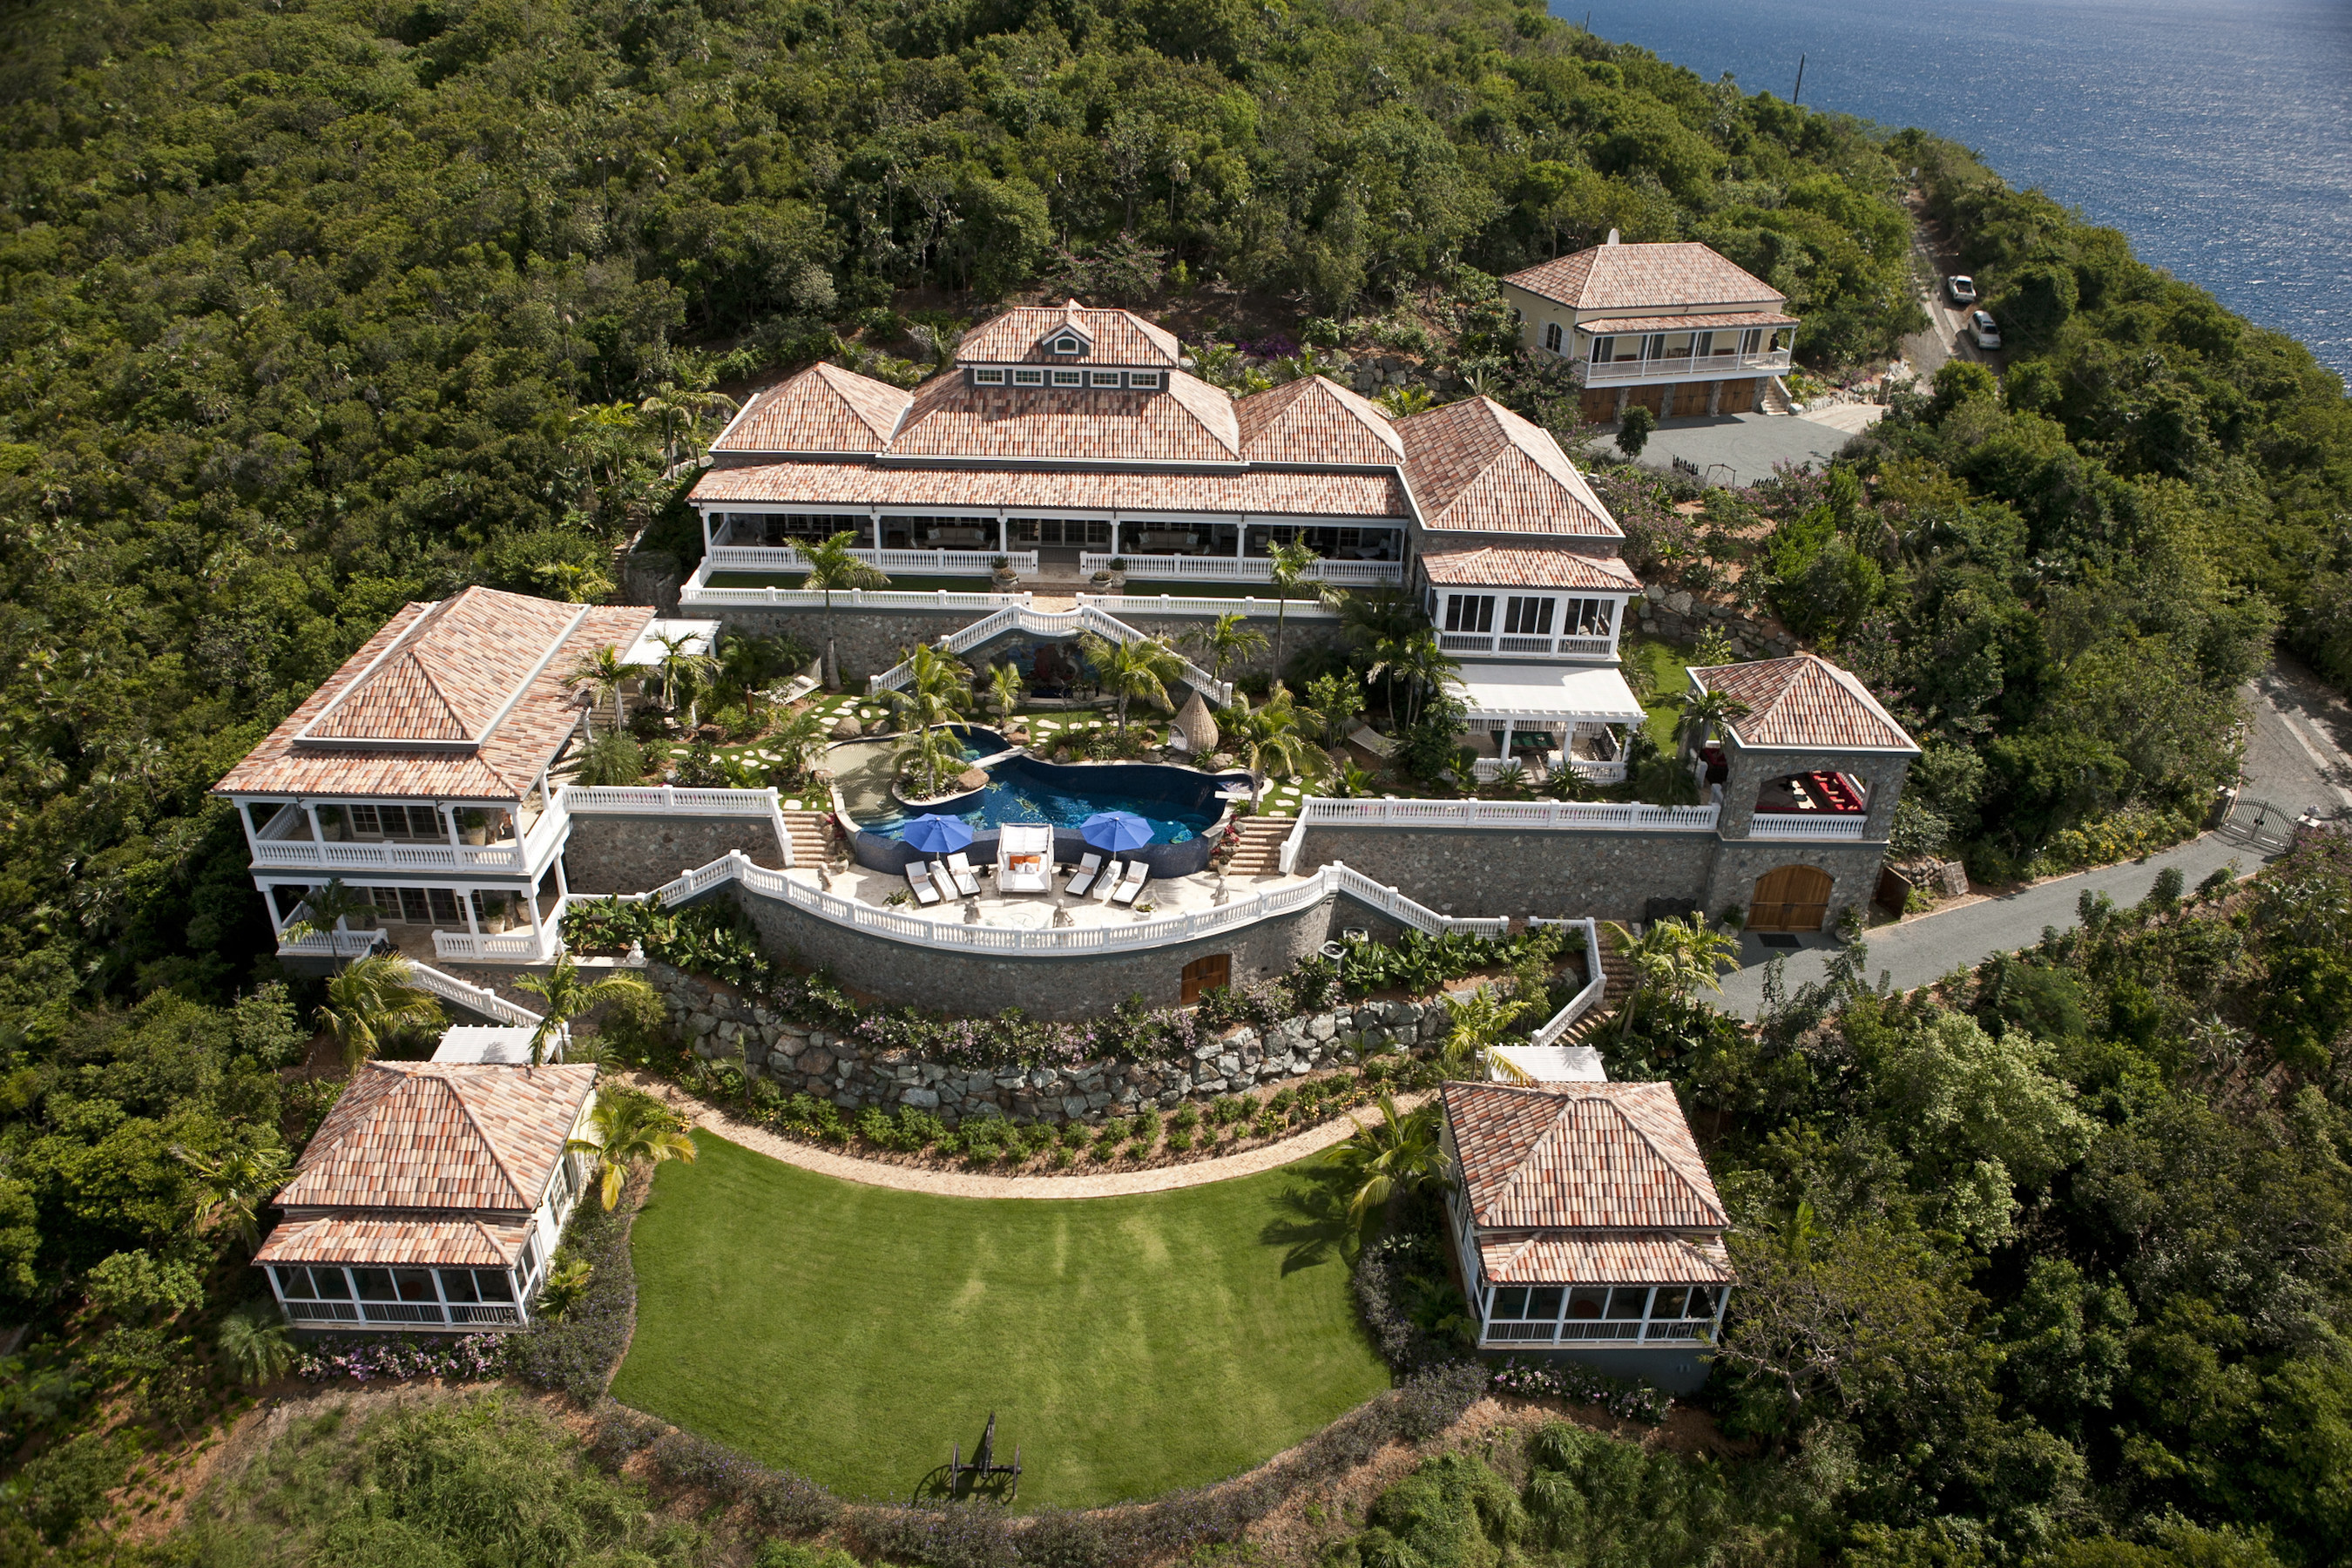 Oceanfront Caribbean Masterpiece going to AUCTION, December 13, 2014! Previously $35 Million. Now Selling Above $6 Million. Presented by Platinum Luxury Auctions. More details at USVILuxuryAuction.com.